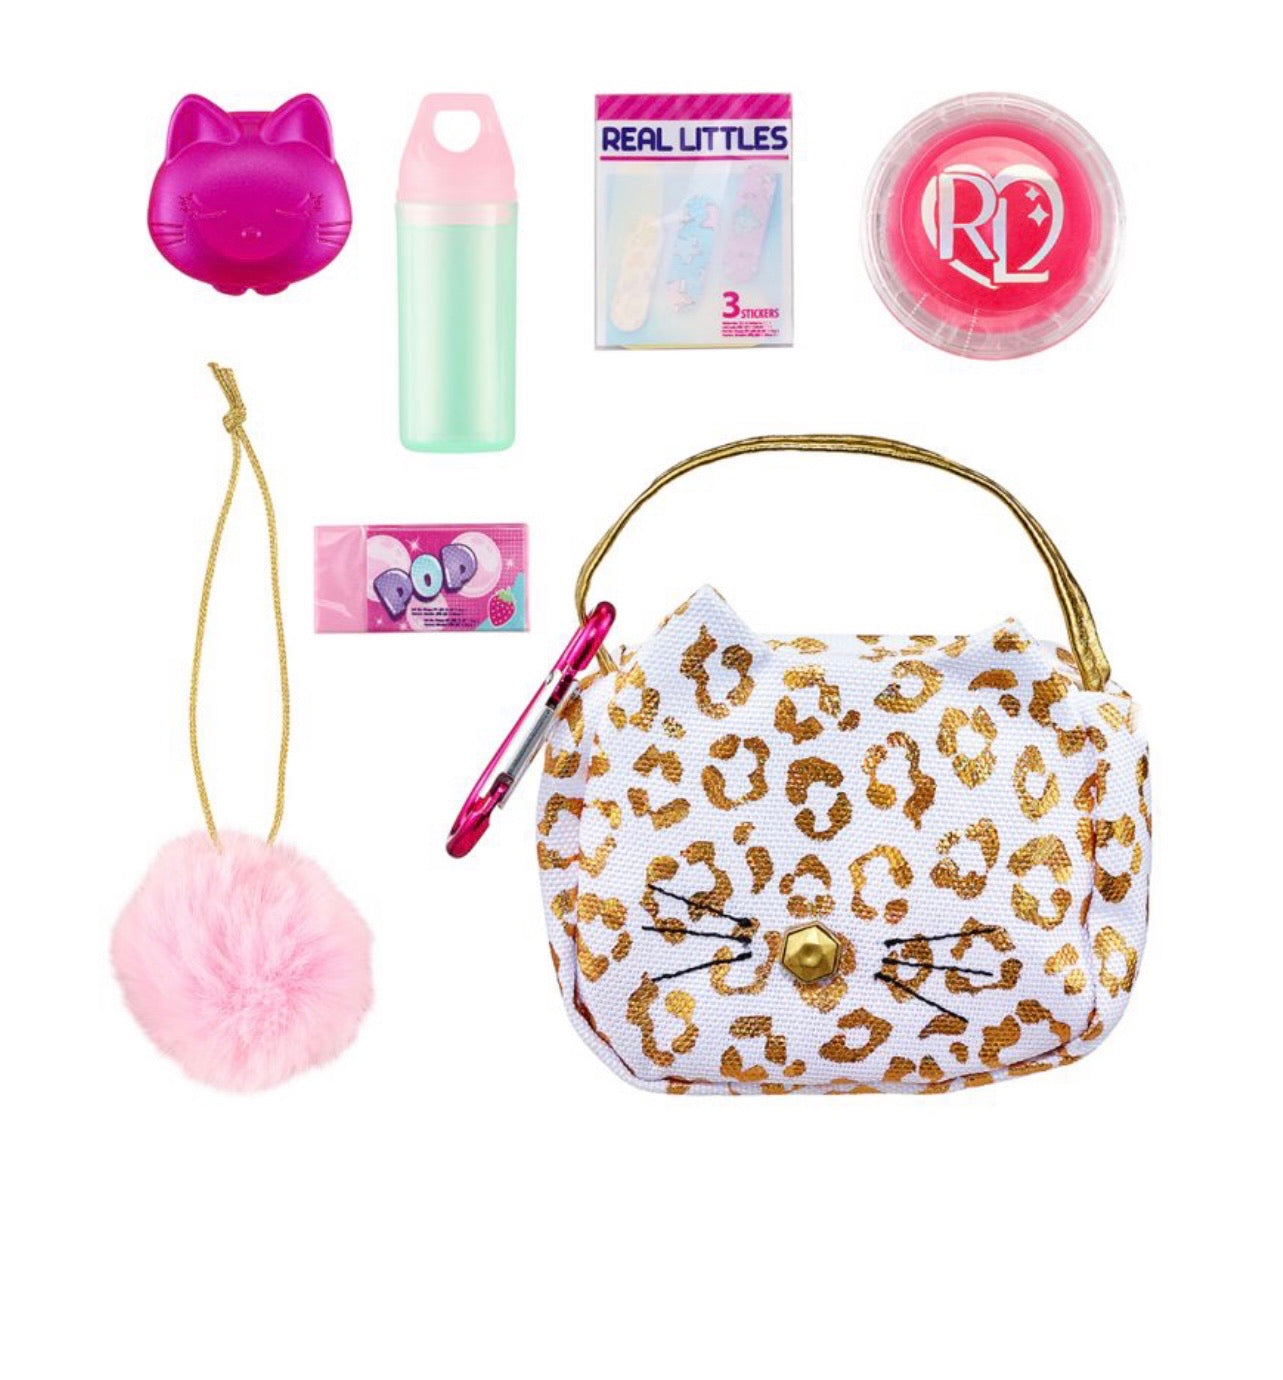 Claire's on X: Real Littles handbags are really cute! 💖 Each